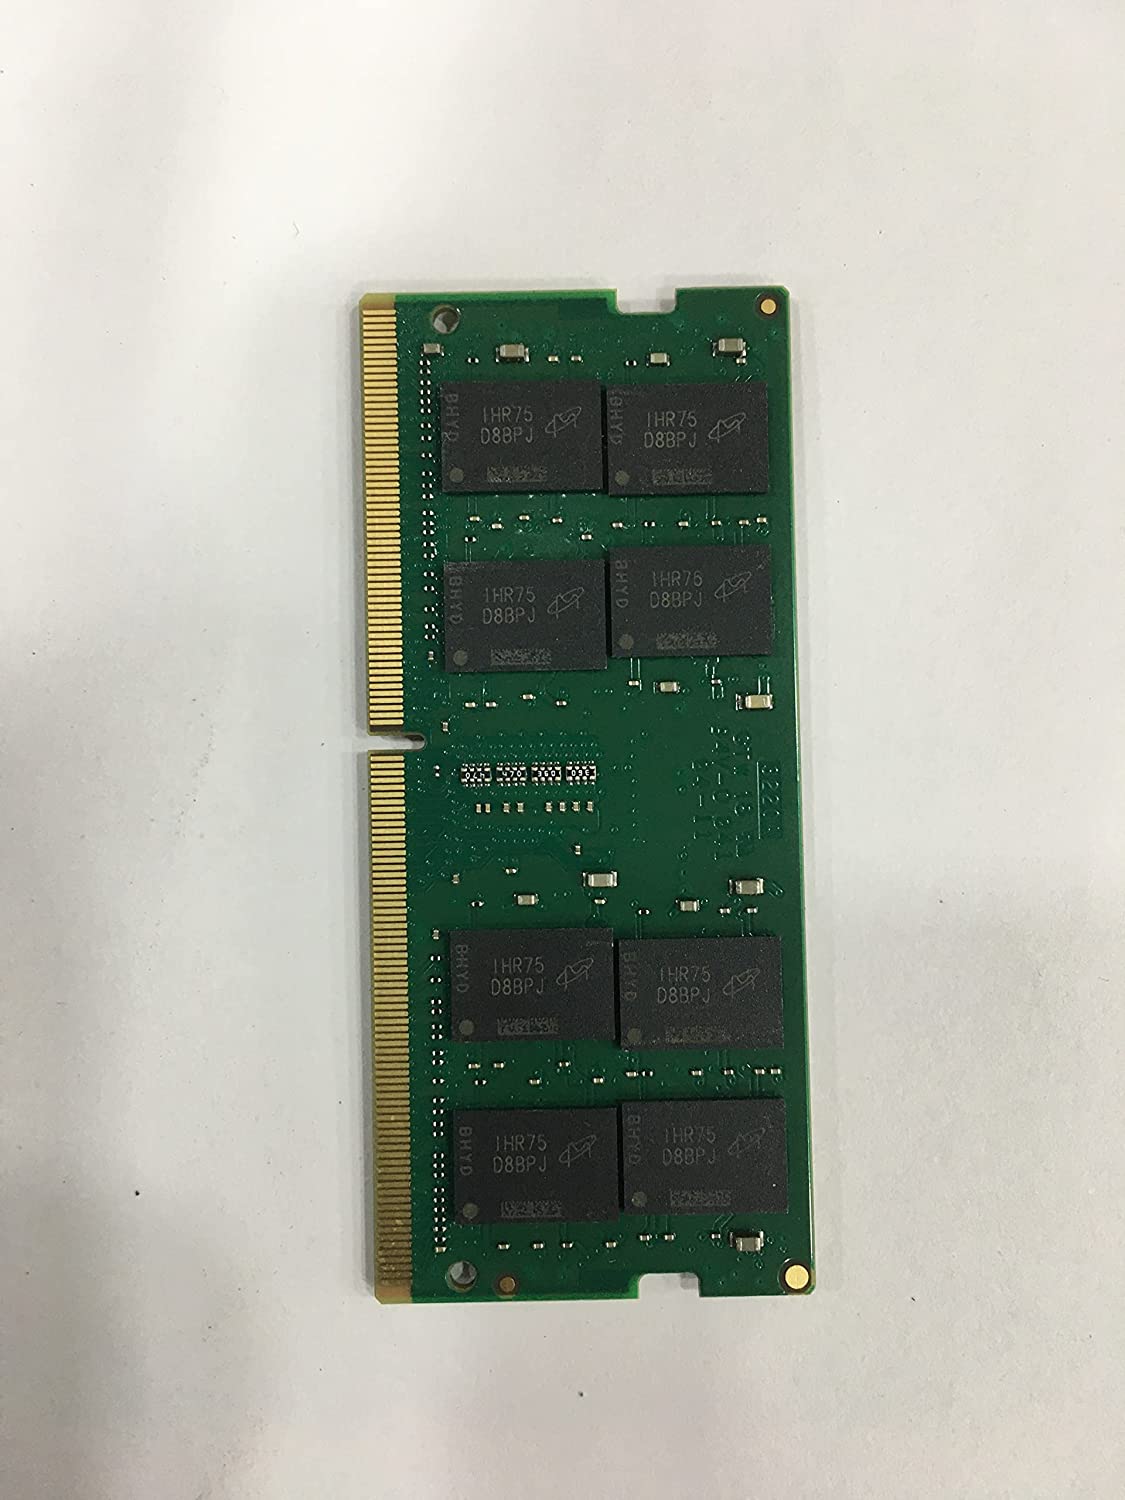 Dell G15 Laptop Memory Upgrade - Crucial CT16G4SFRA32A 